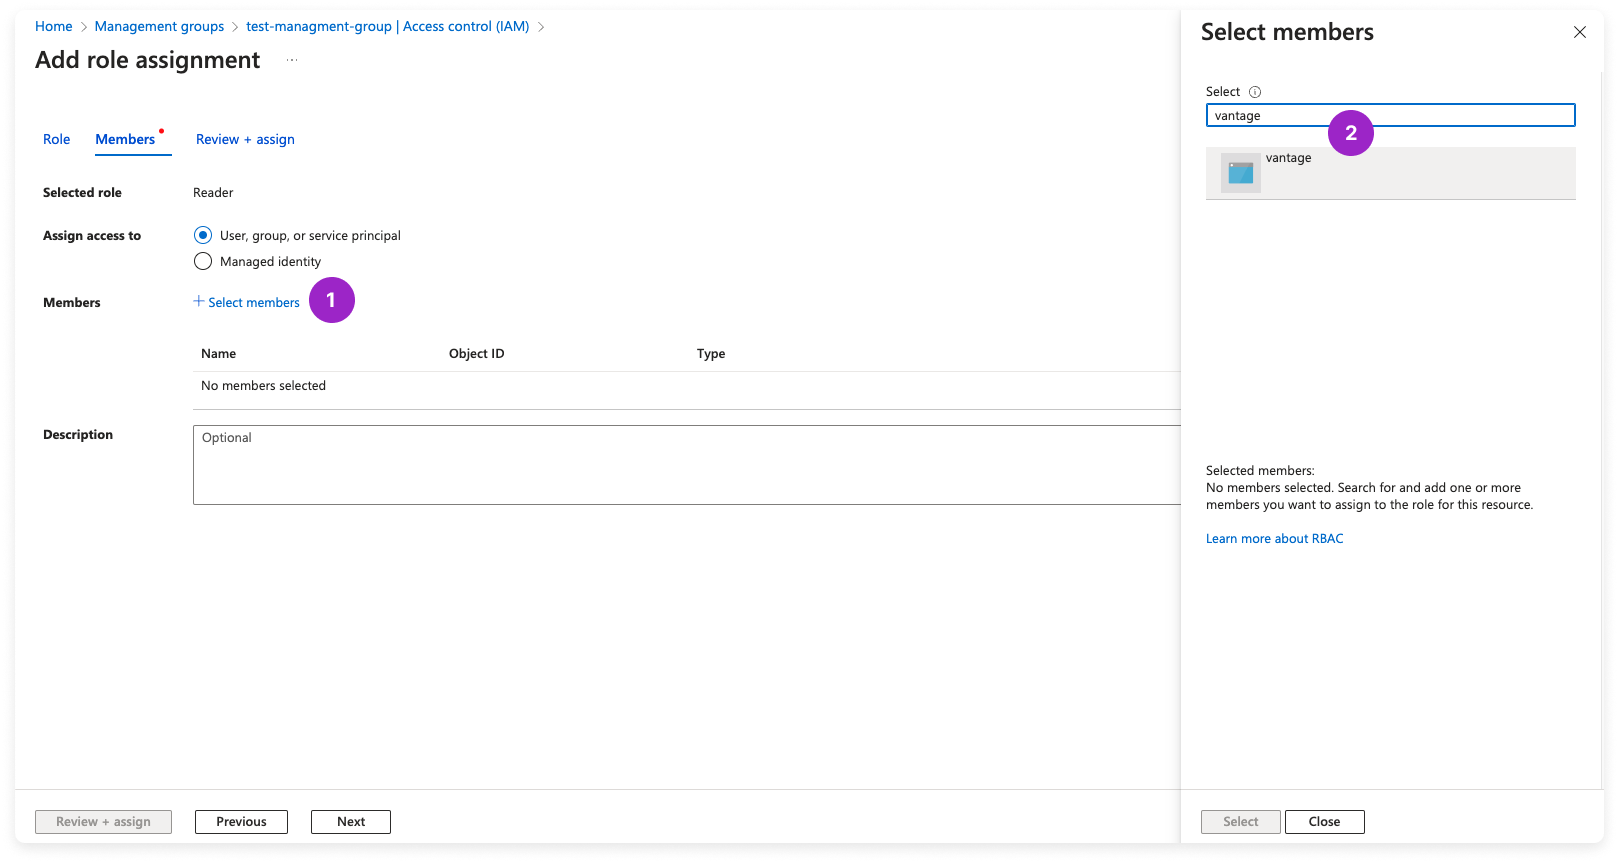 Azure portal with Add role assignment window displayed